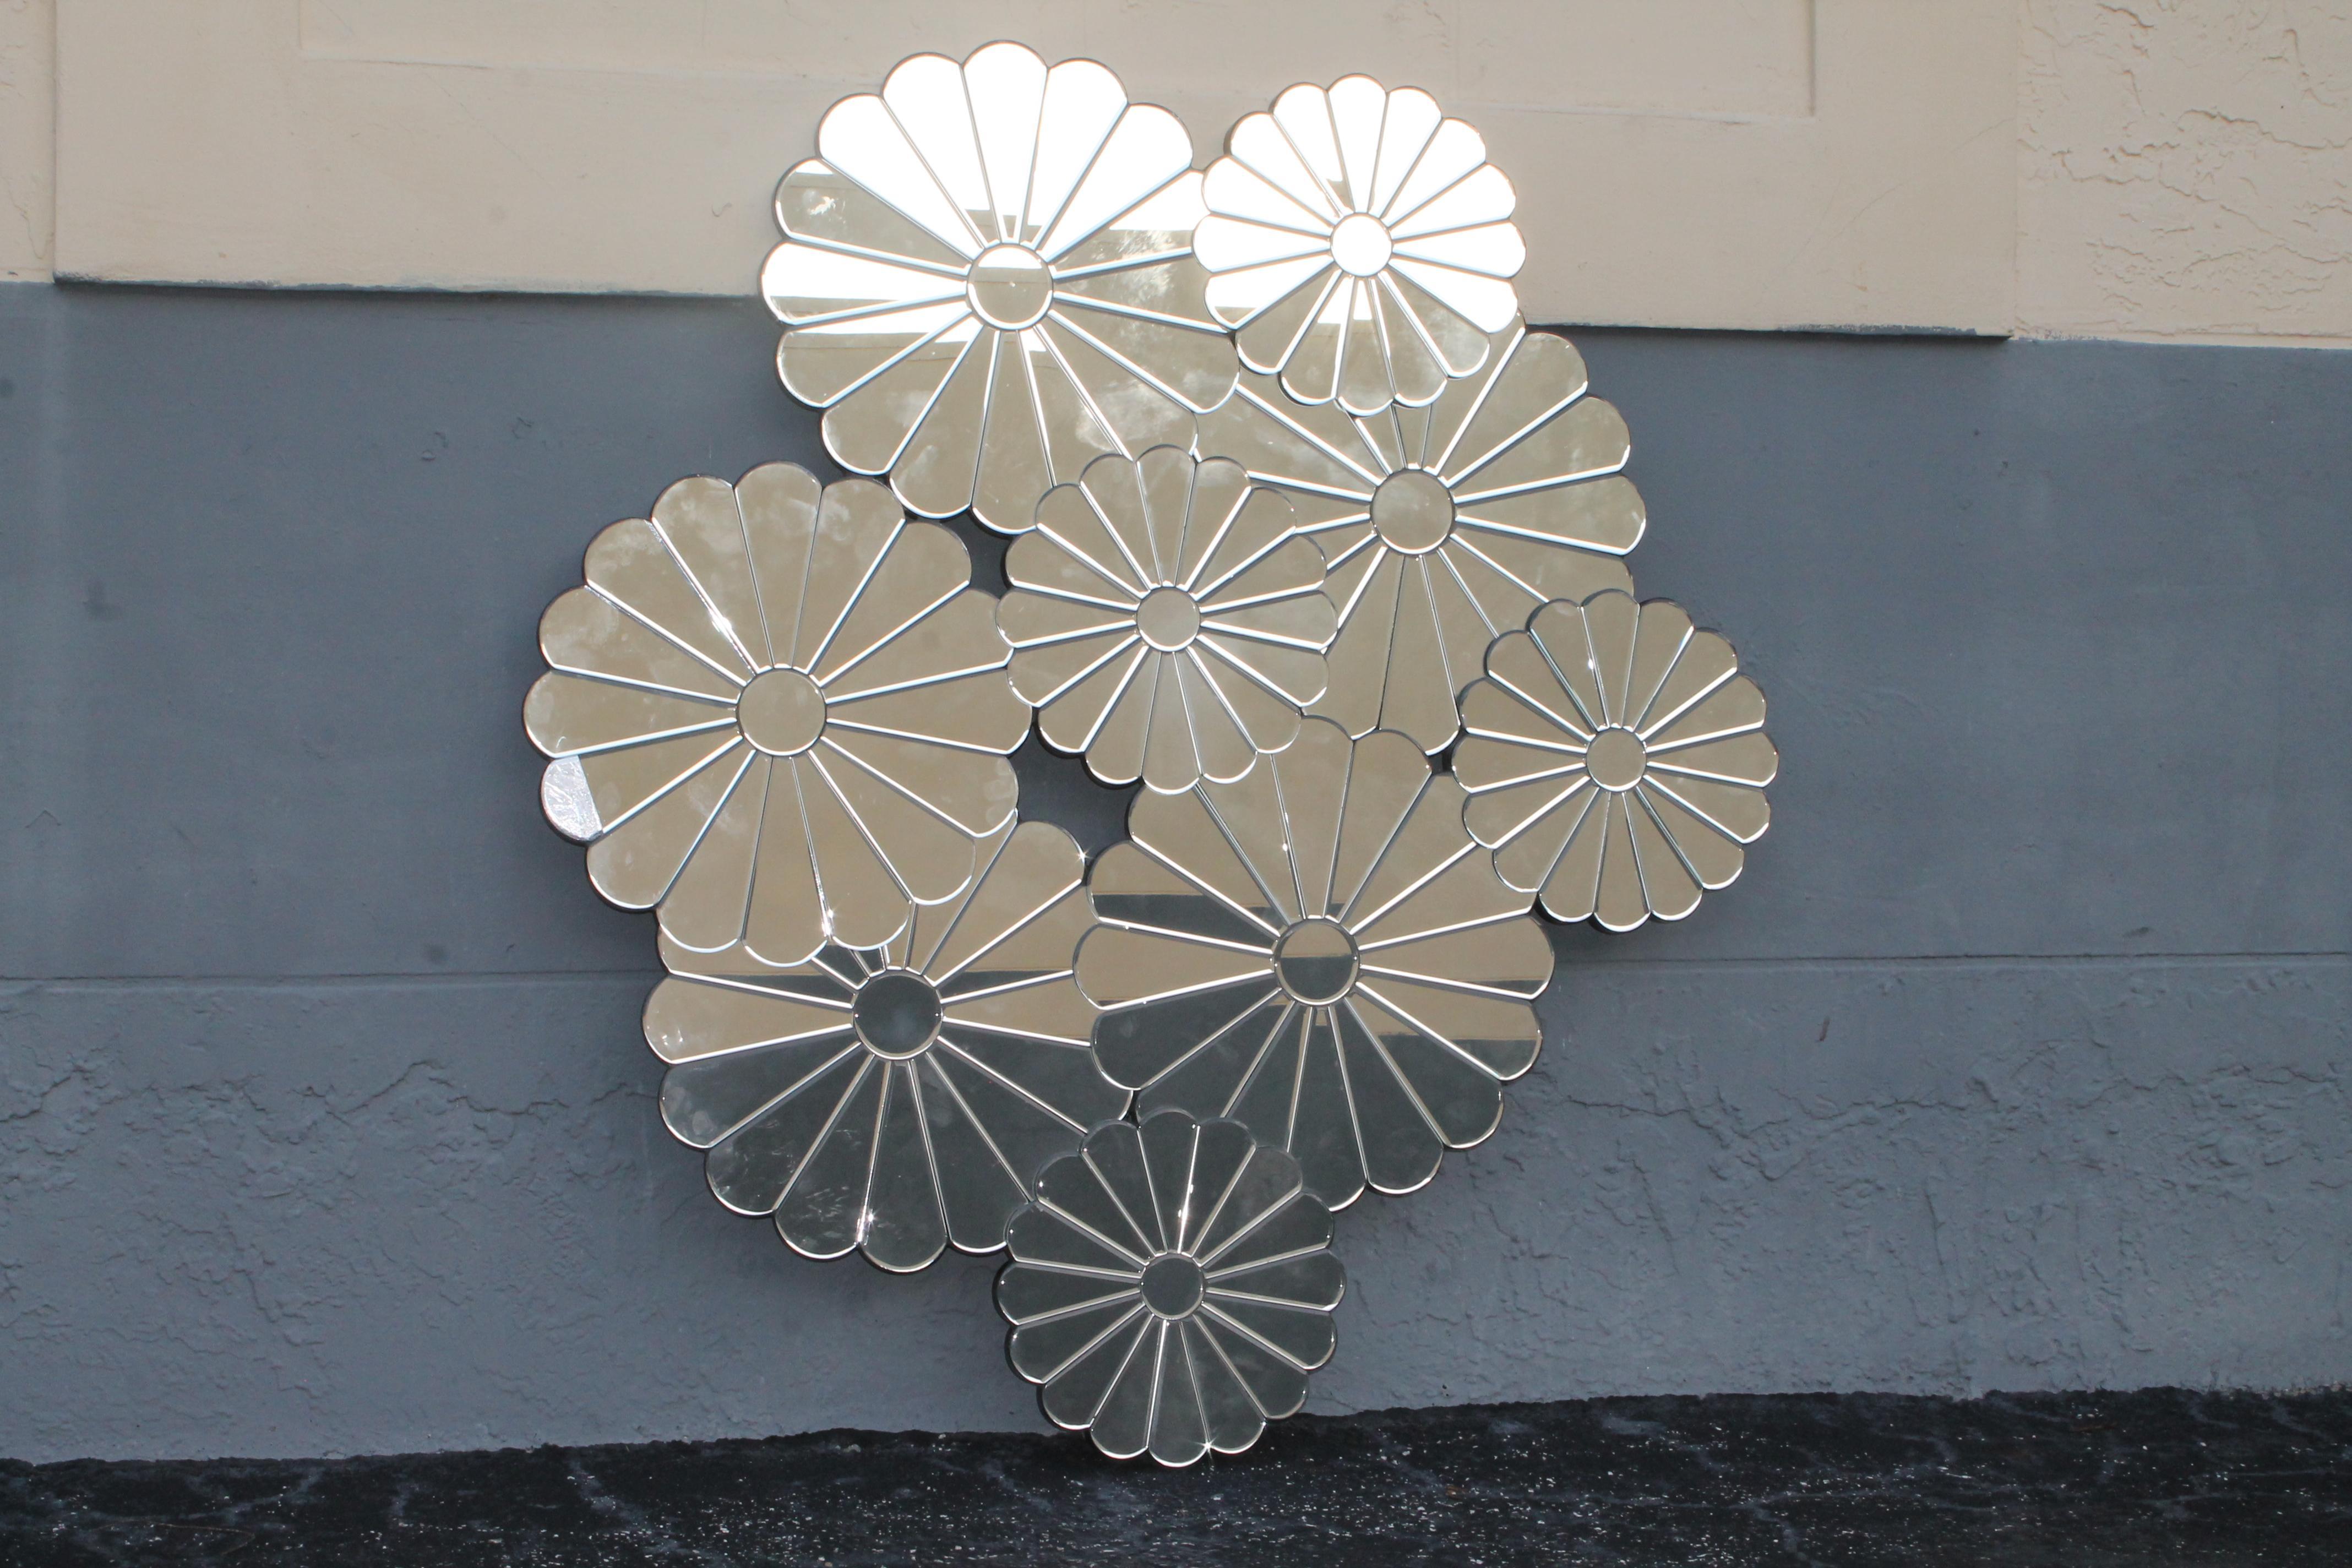 Large 1960s Mid Century Modern Fully Mirrored Flower Blossm Cluster Wall Mirror. This piece was quite a find. Many pieces of artfully placed mirrored flower blossoms. This statement piece can go anywhere.